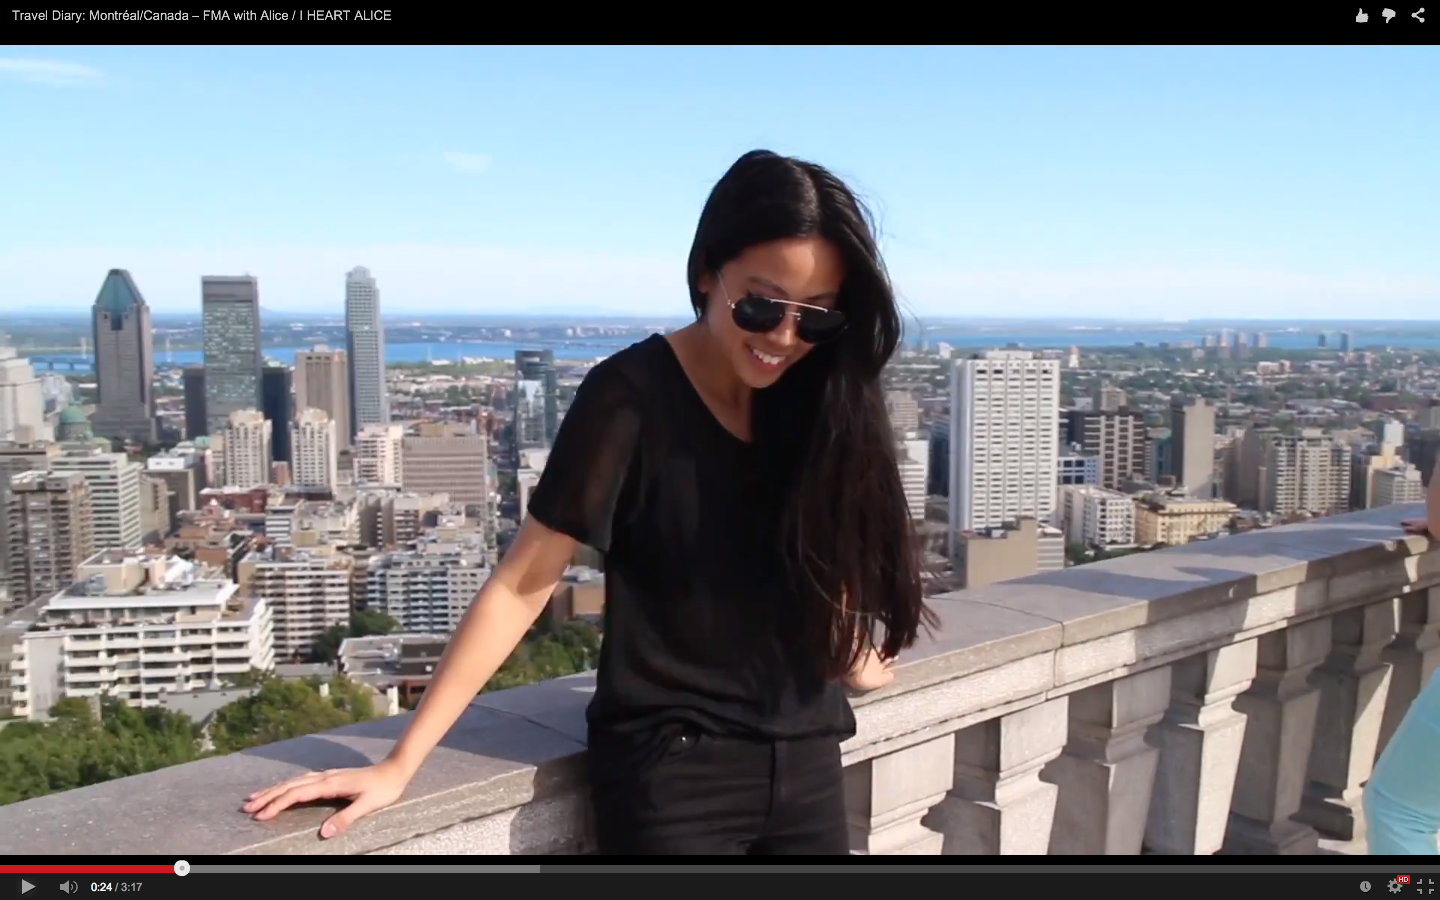 IHEARTALICE.DE – Fashion & Travel-Blog by Alice M. Huynh from Berlin/Germany: Montreal Travel Diary / FMA Vlog Canada Montreal